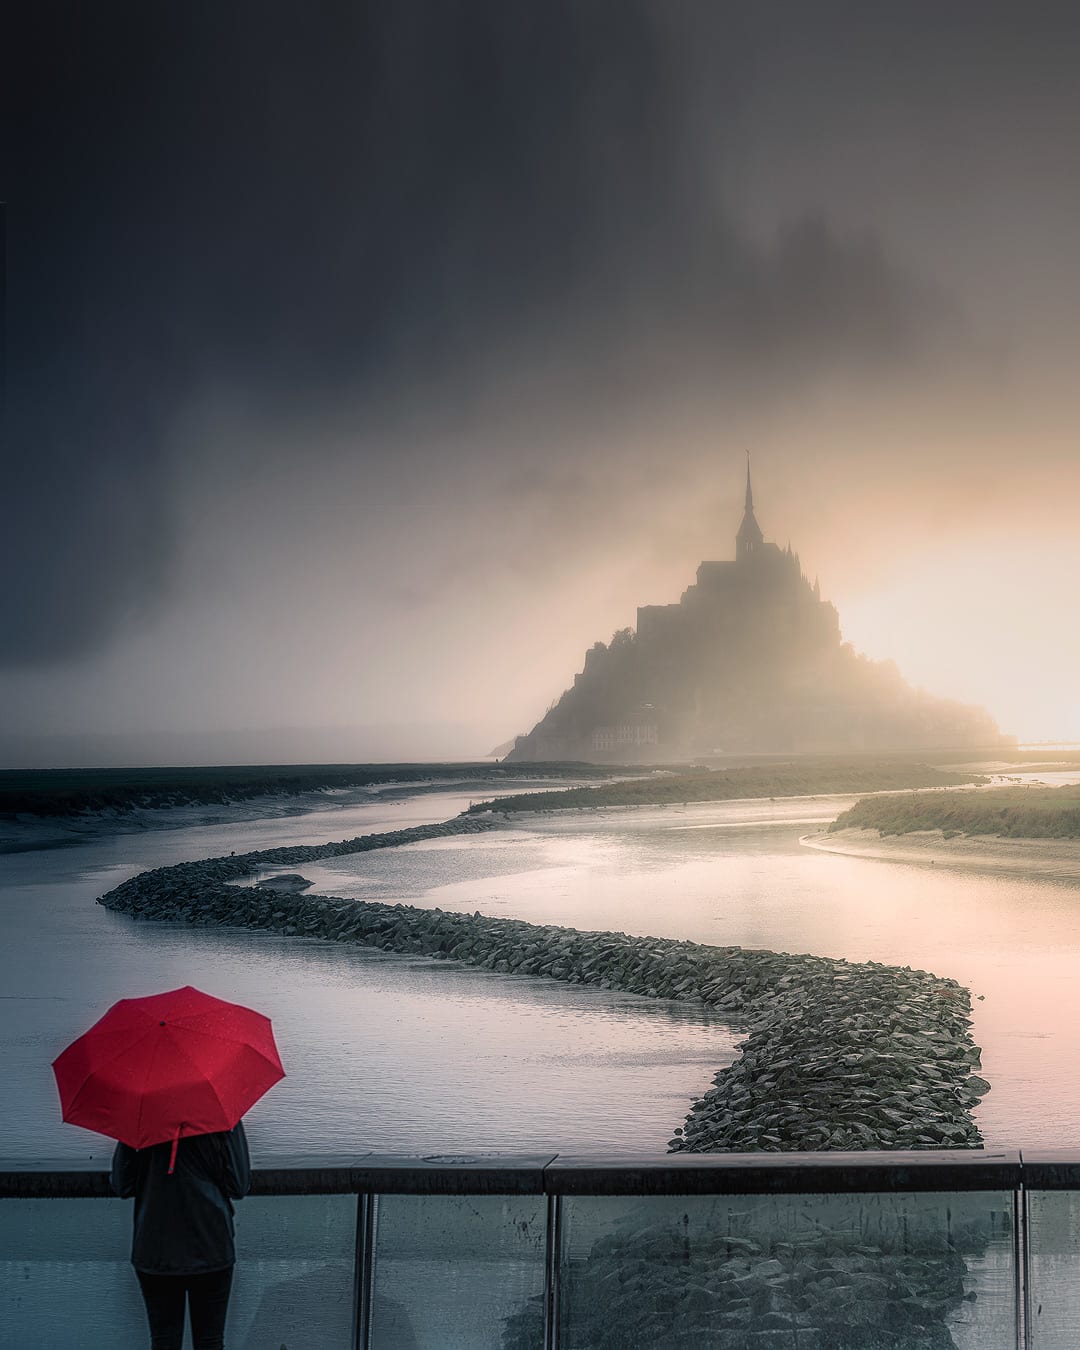 ITAP of the Mont Saint-Michel during a raining day